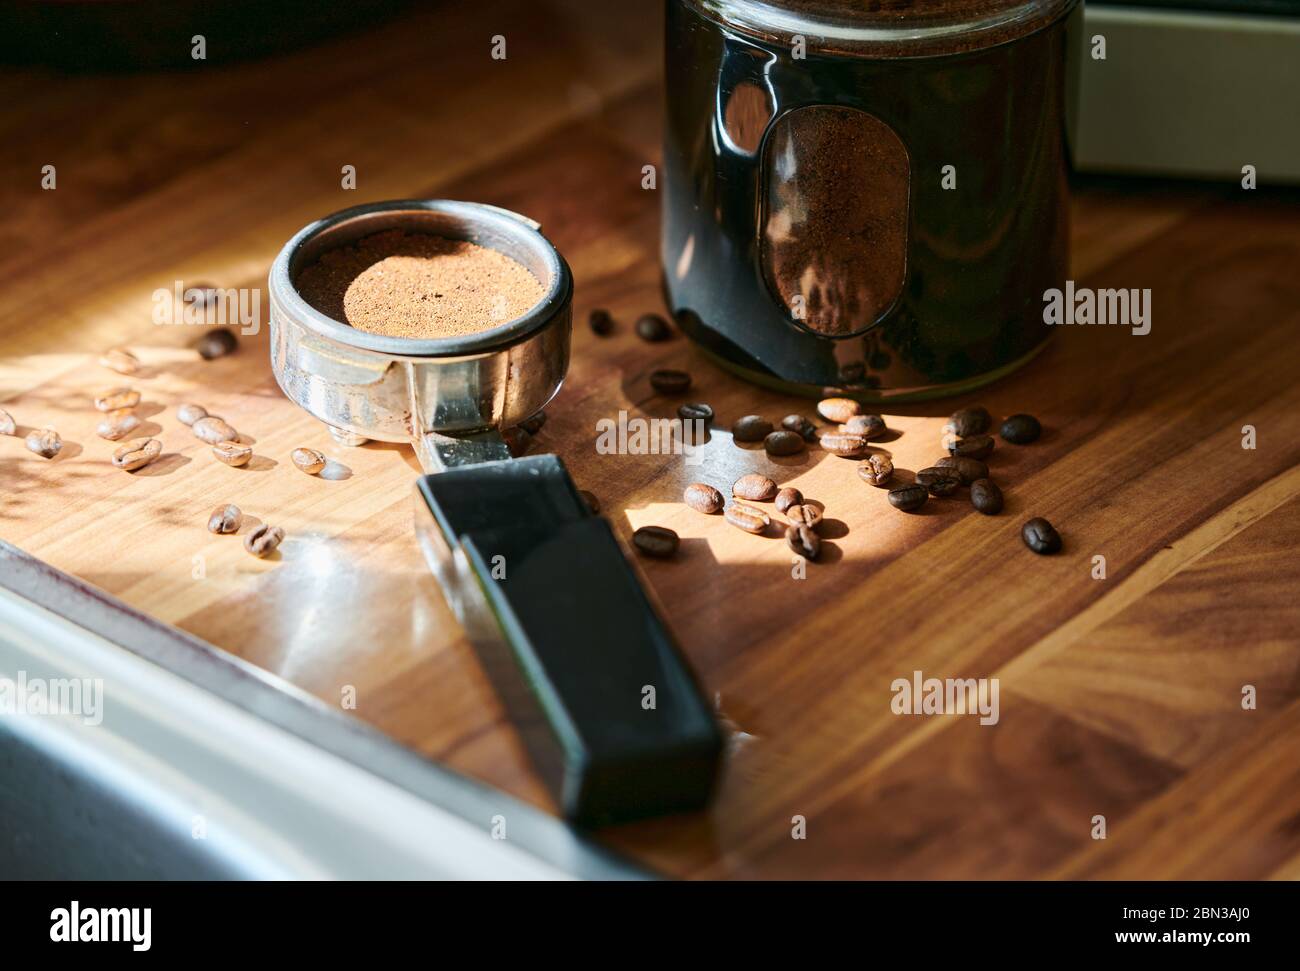 Coffee powder in the measuring cup to make espresso at home with coffee beans in the background. Stock Photo